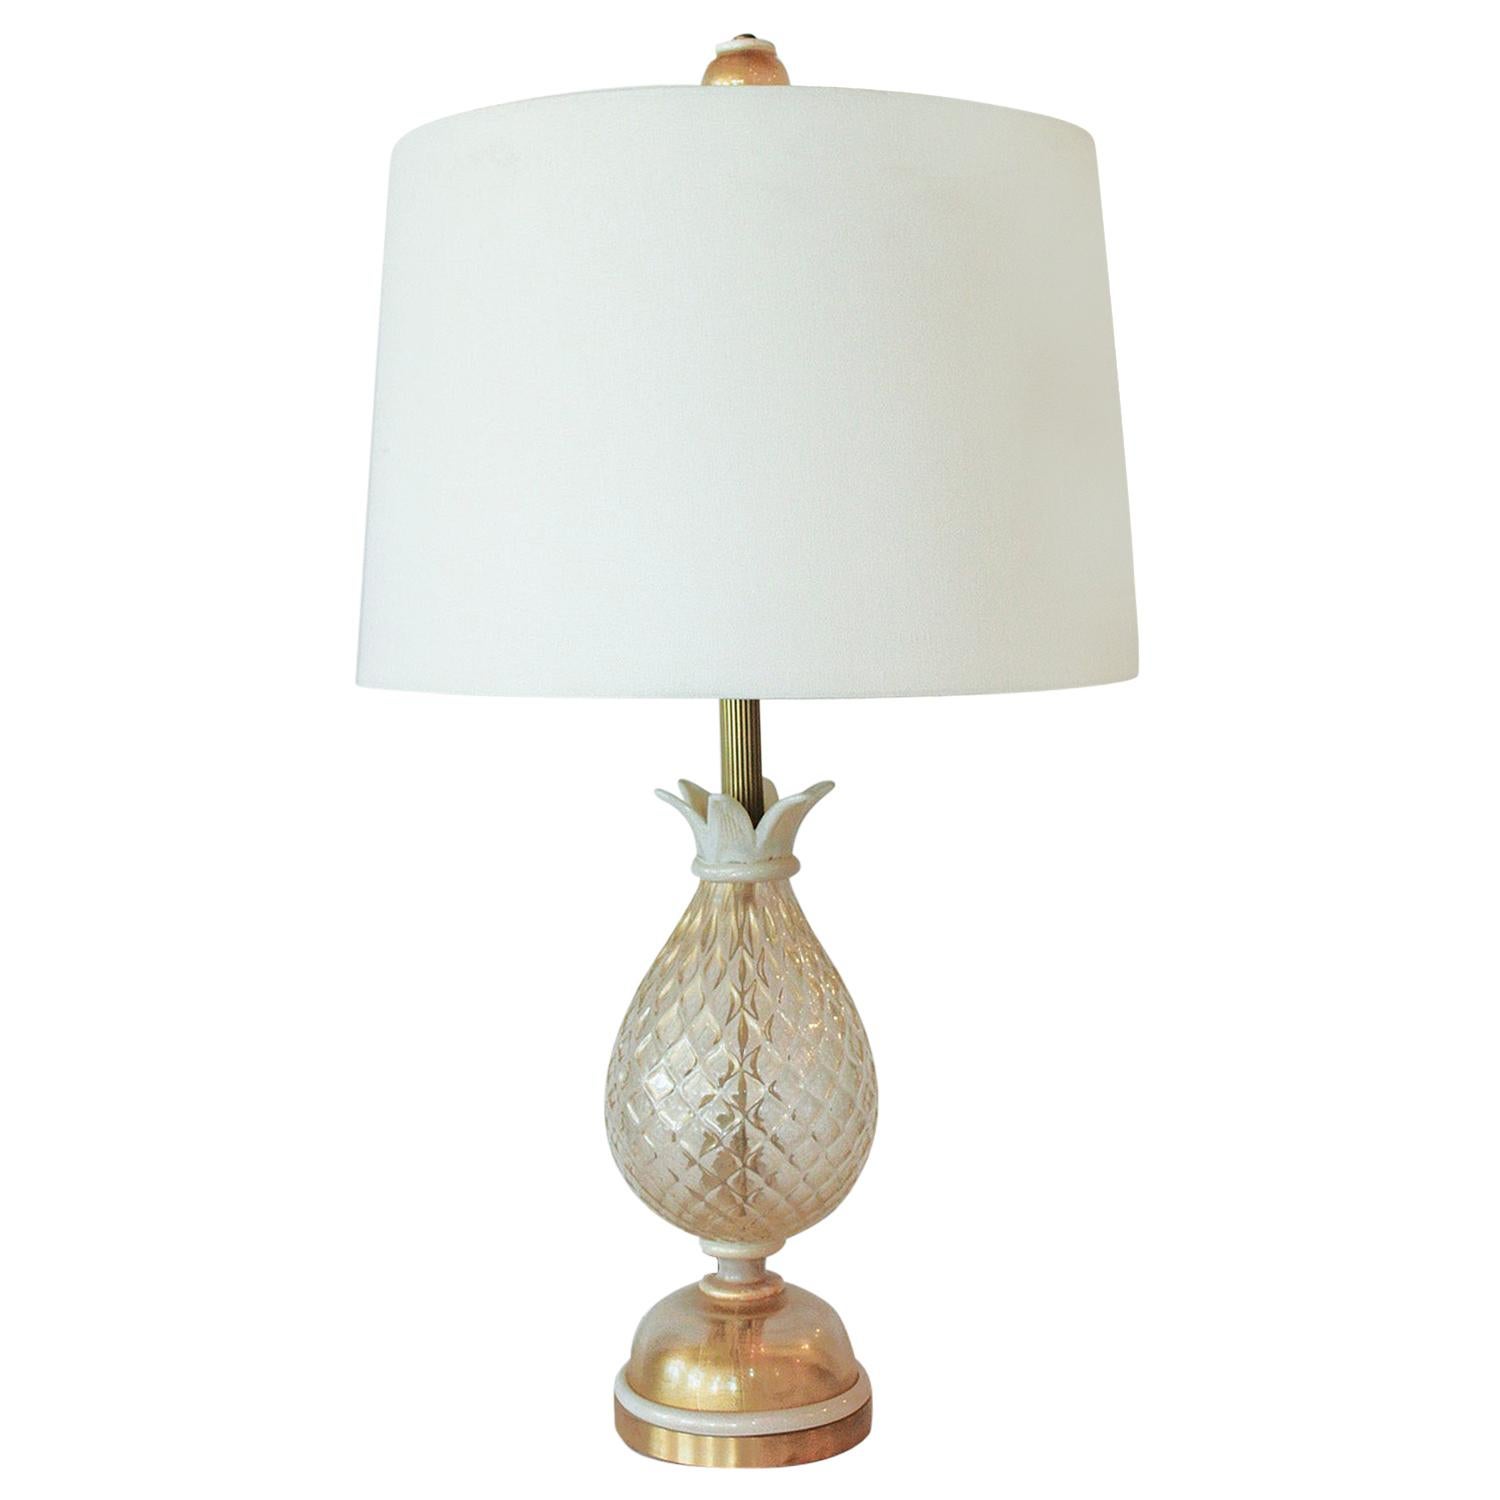 1960s Seguso White and Clear Gold Dusted Murano Glass Pineapple Lamp For Sale